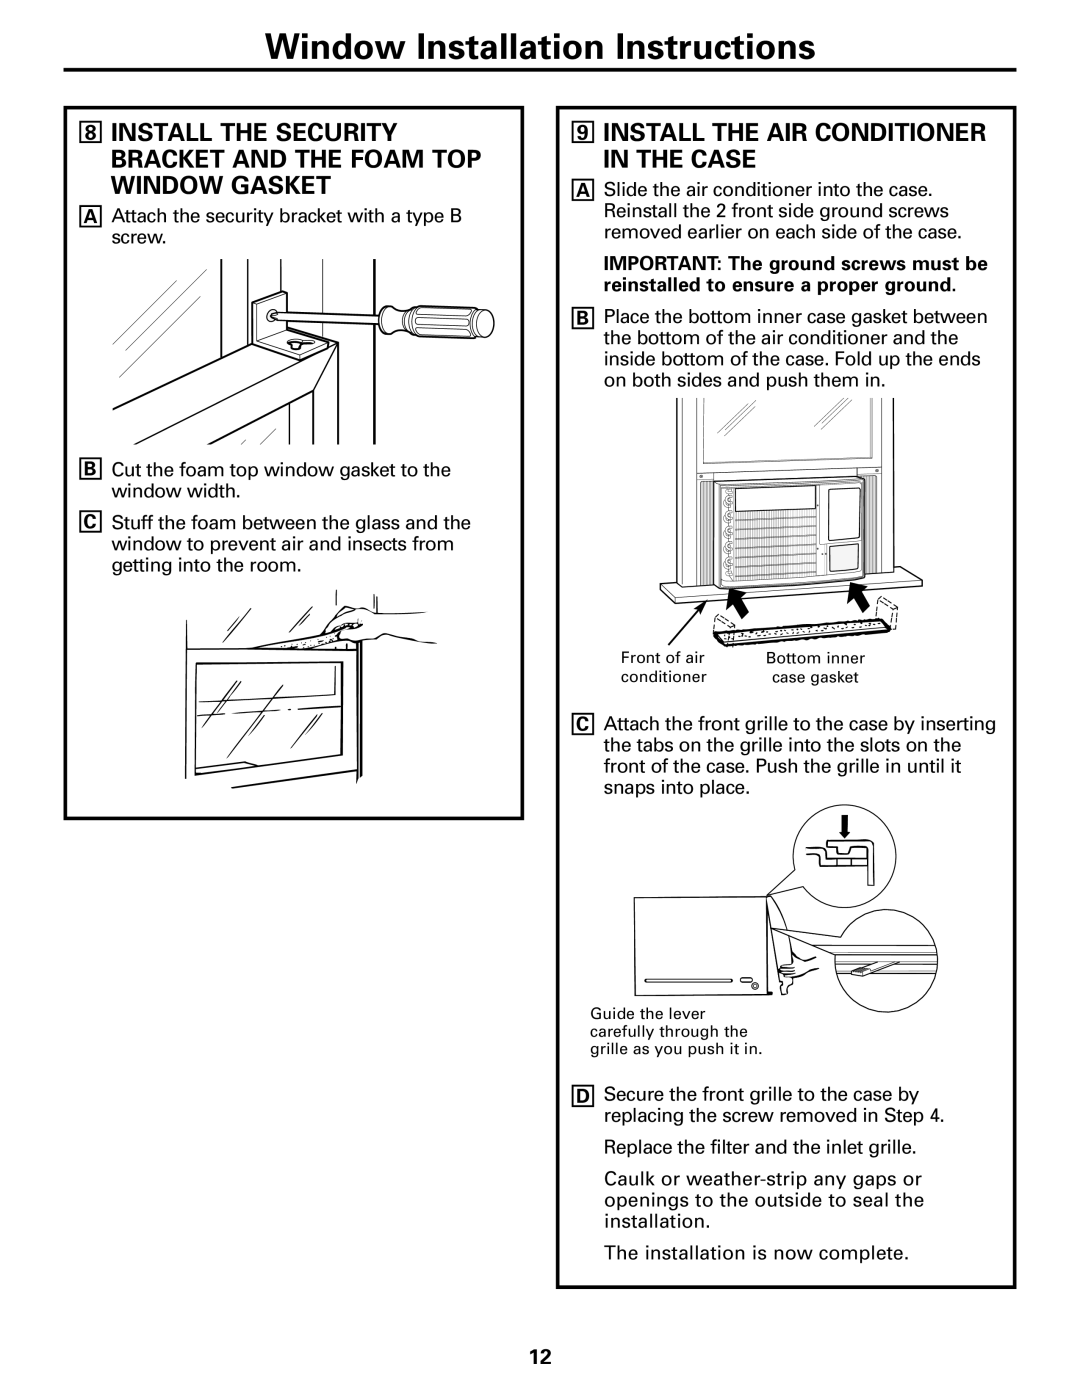 GE ASQ28 owner manual 9INSTALL THE AIR CONDITIONER IN THE CASE, Window Installation Instructions 